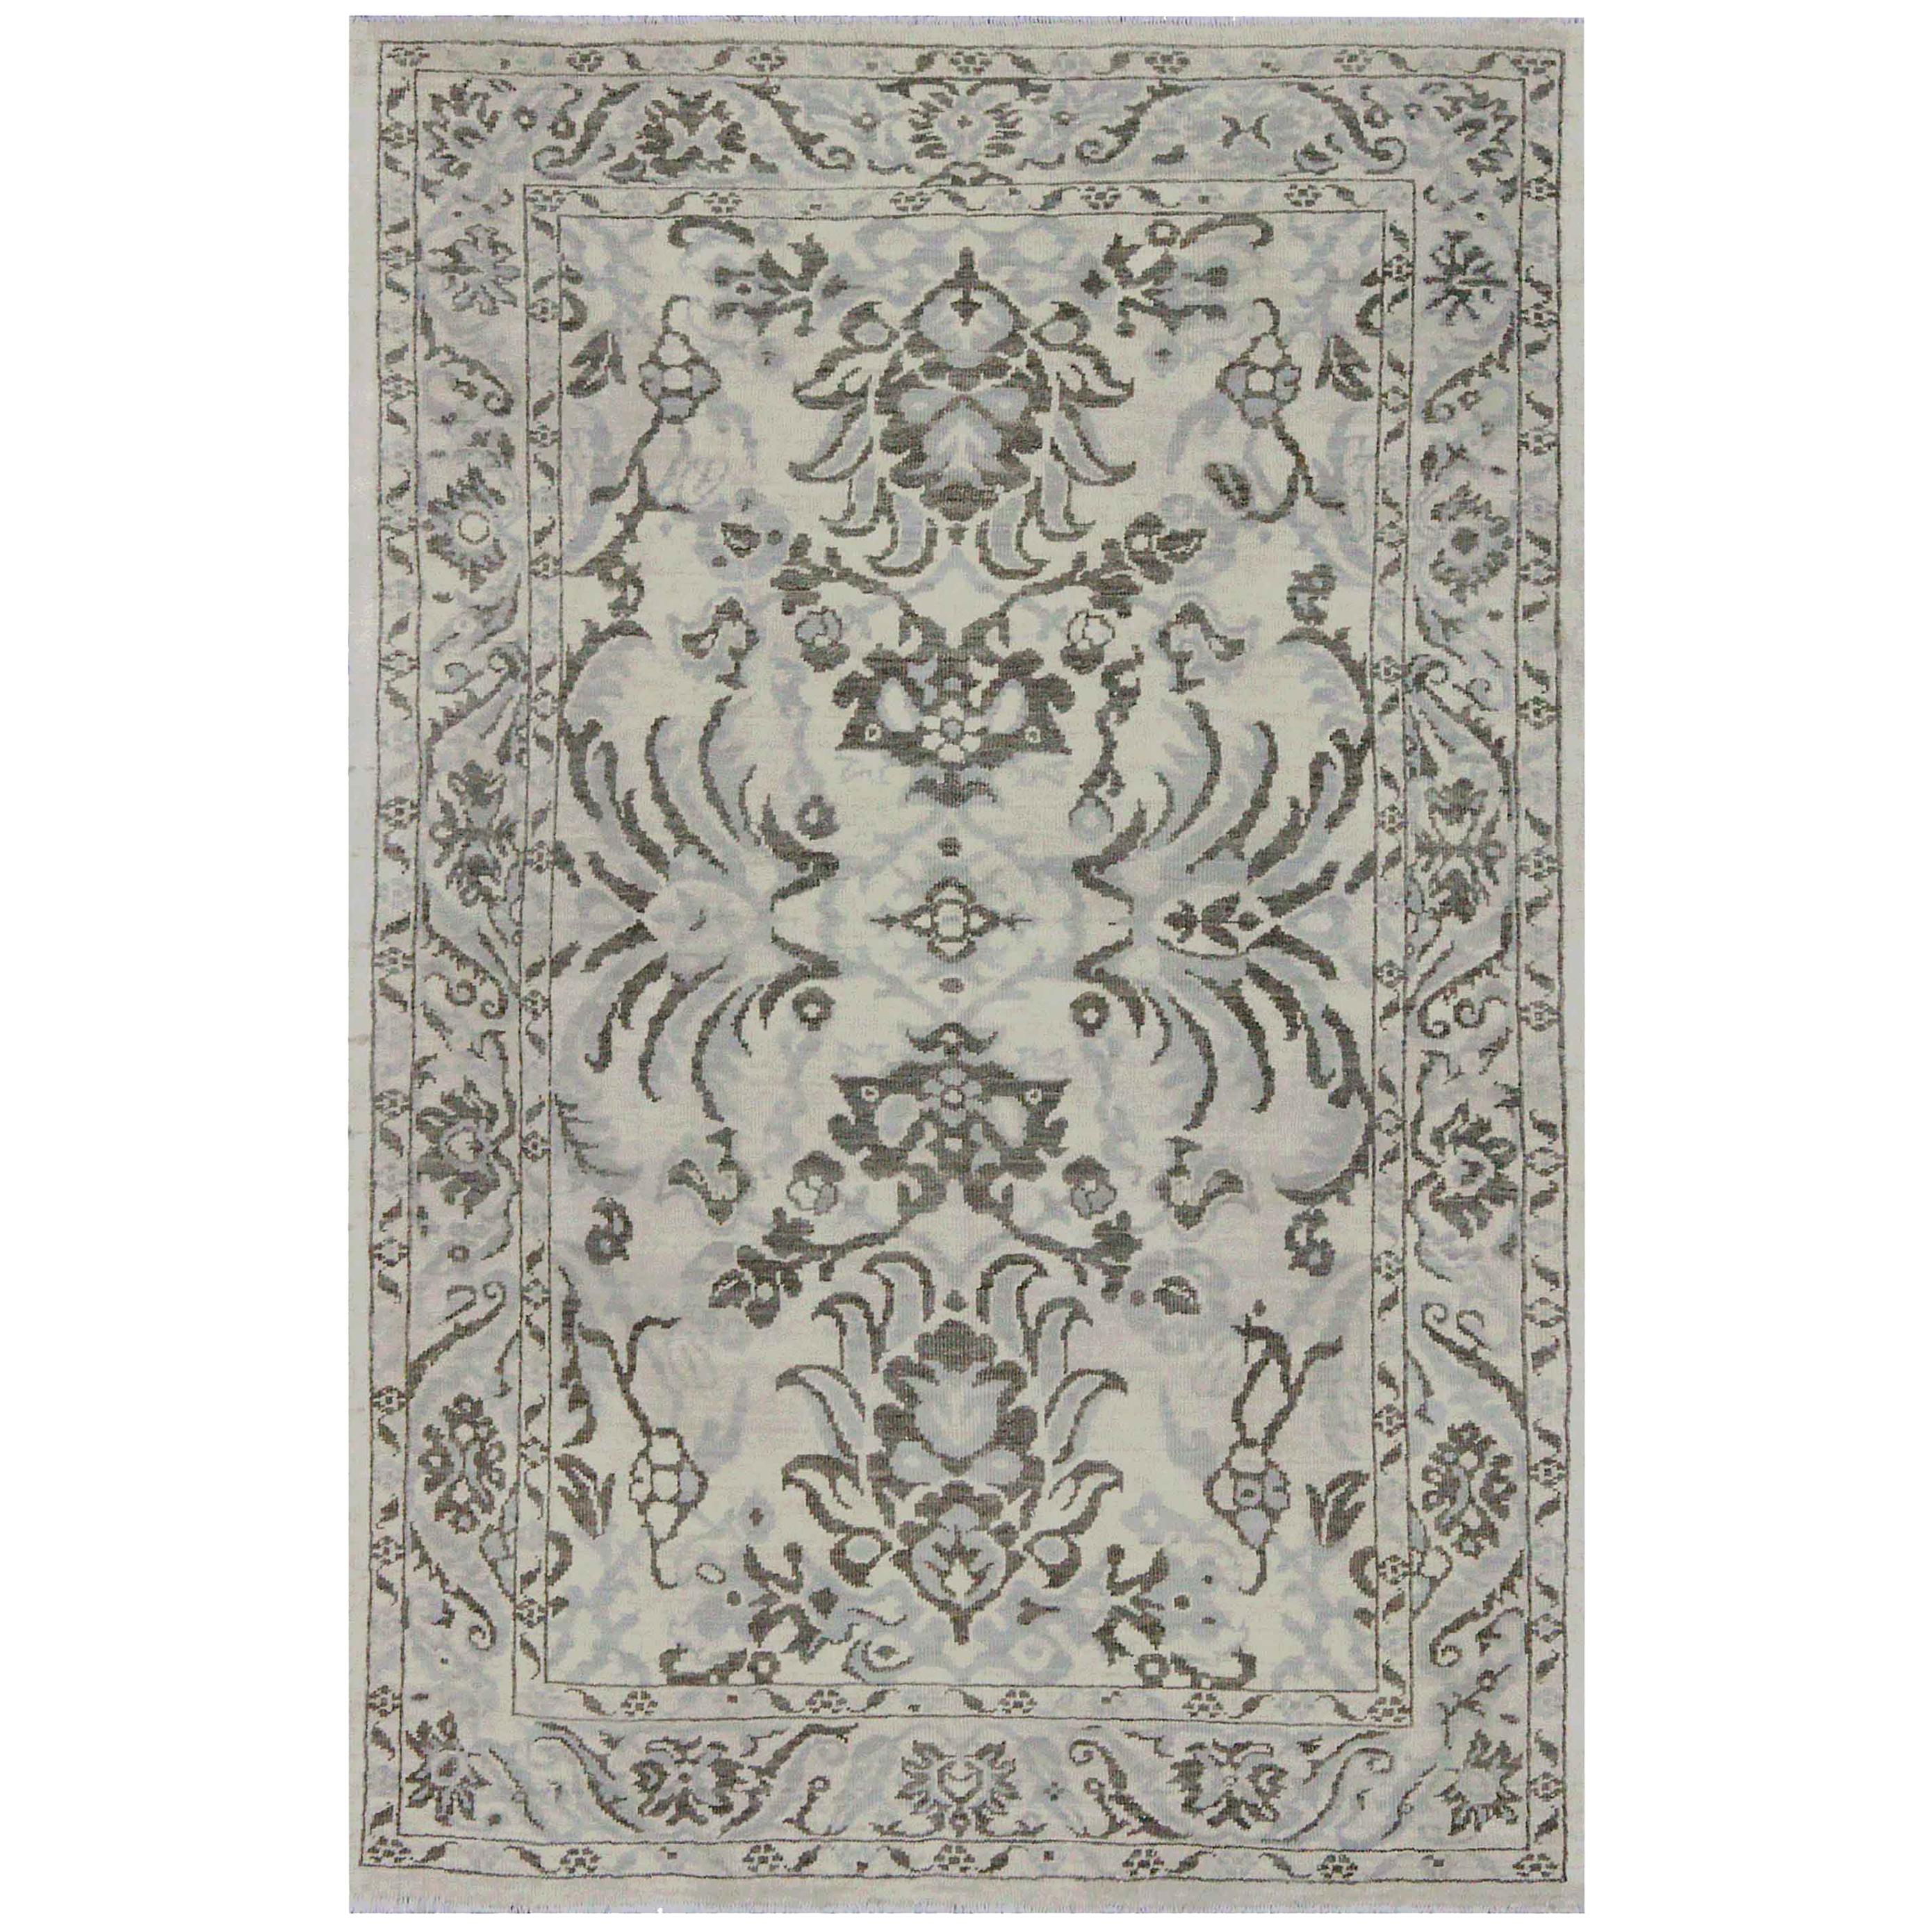 New Turkish Rug Sultanabad Design with Ivory and Gray Botanical Details